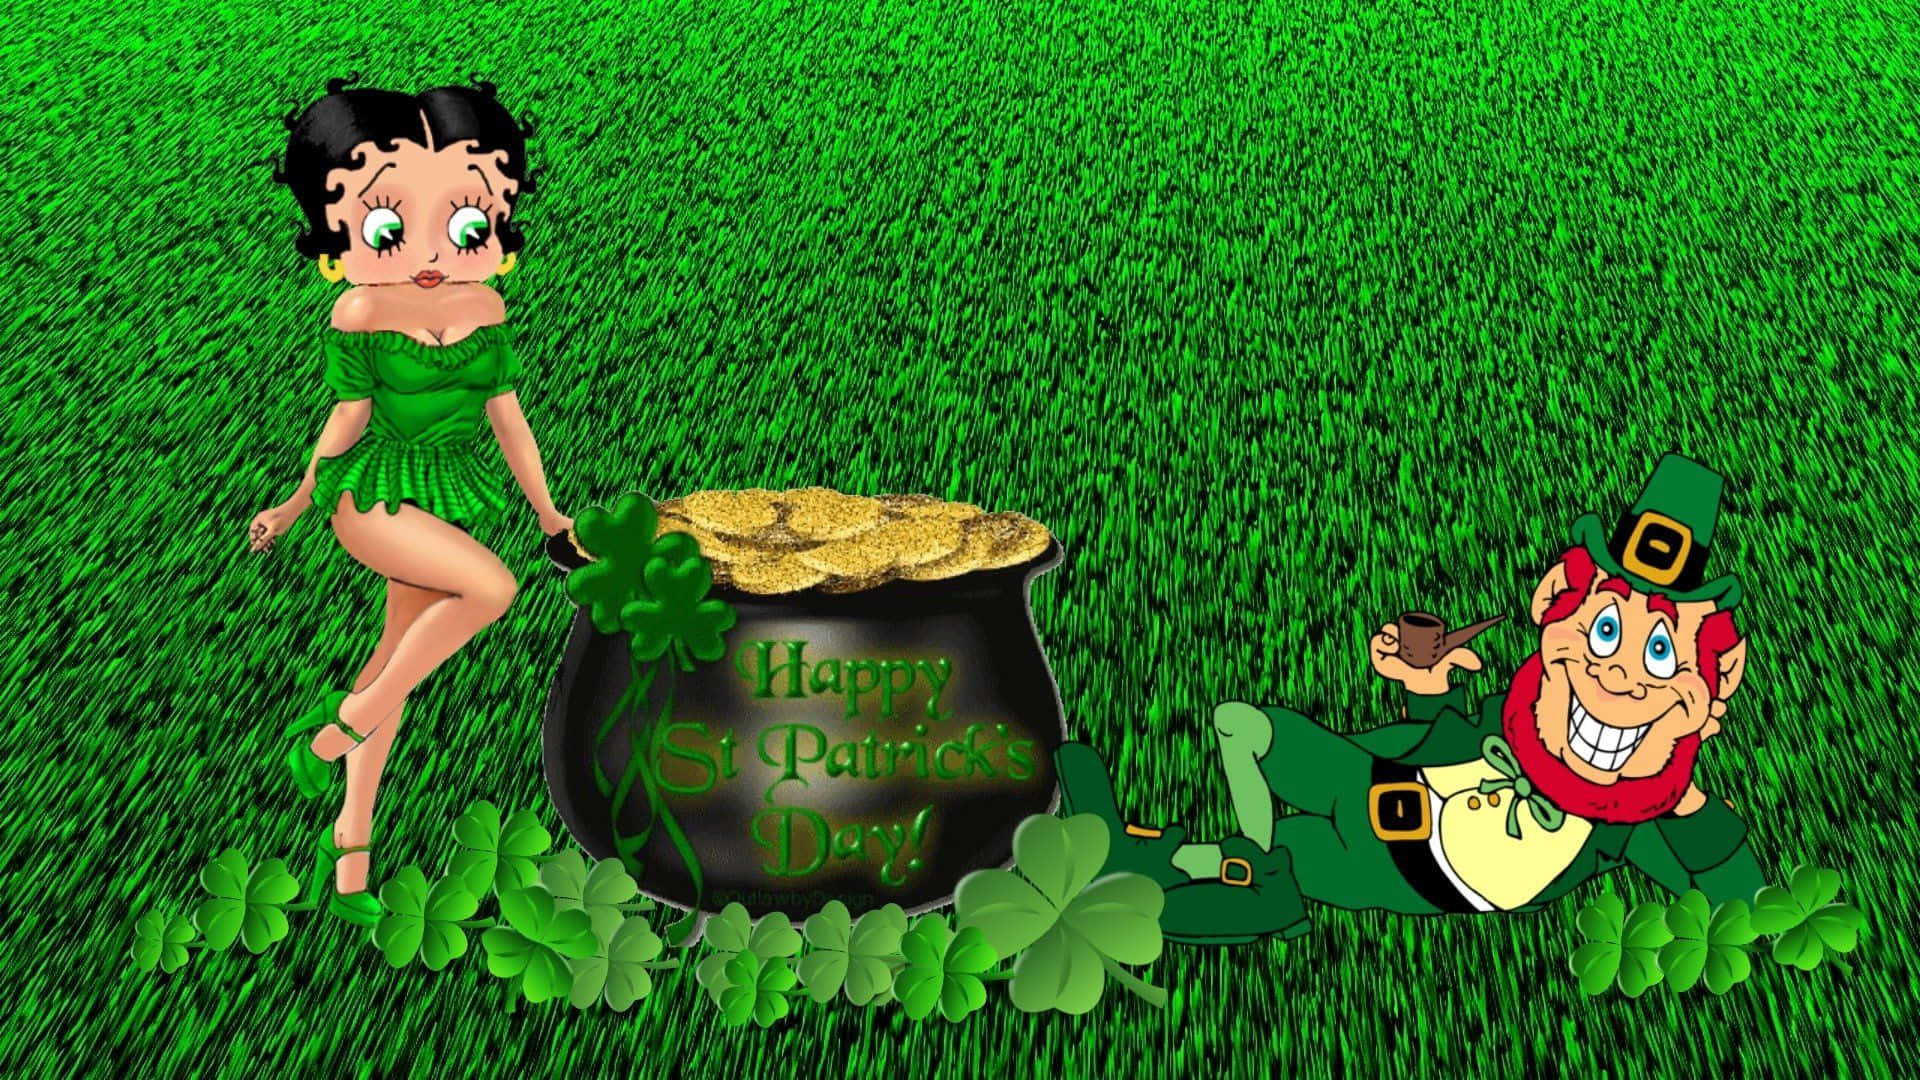 Betty Boop And Leprechaun St. Patrick's Day Background